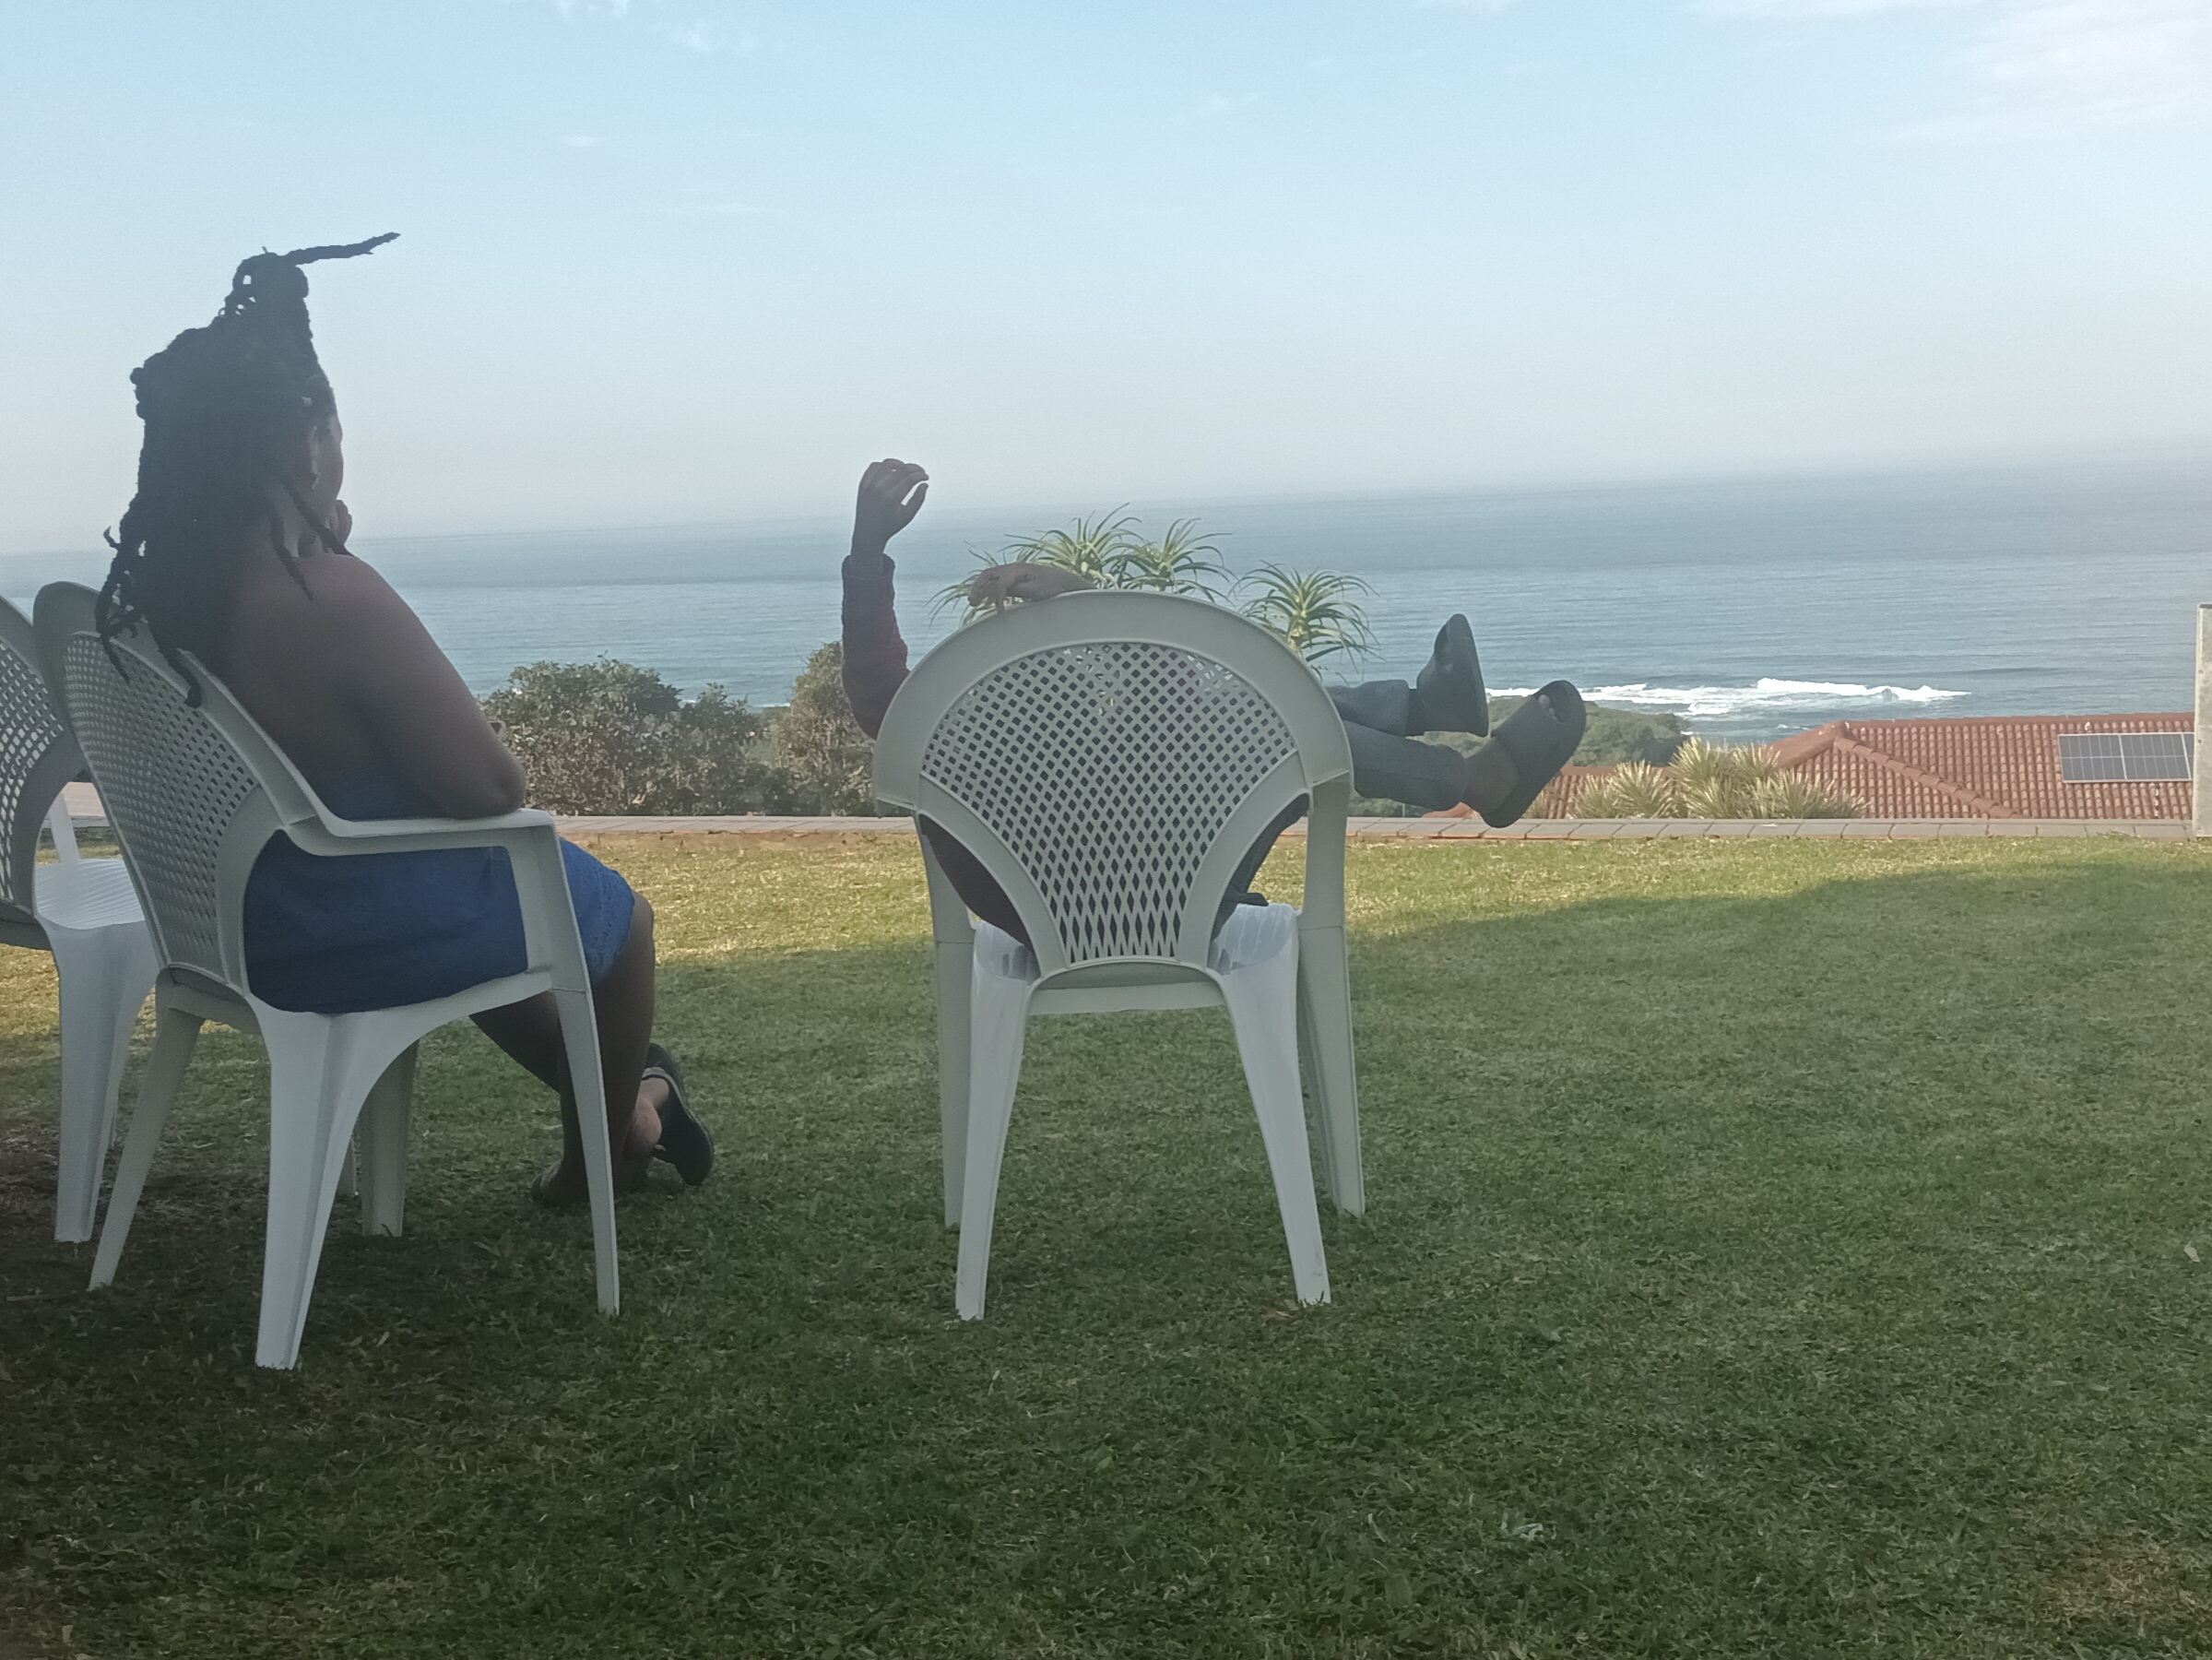 two people sitting in chairs on a lawn